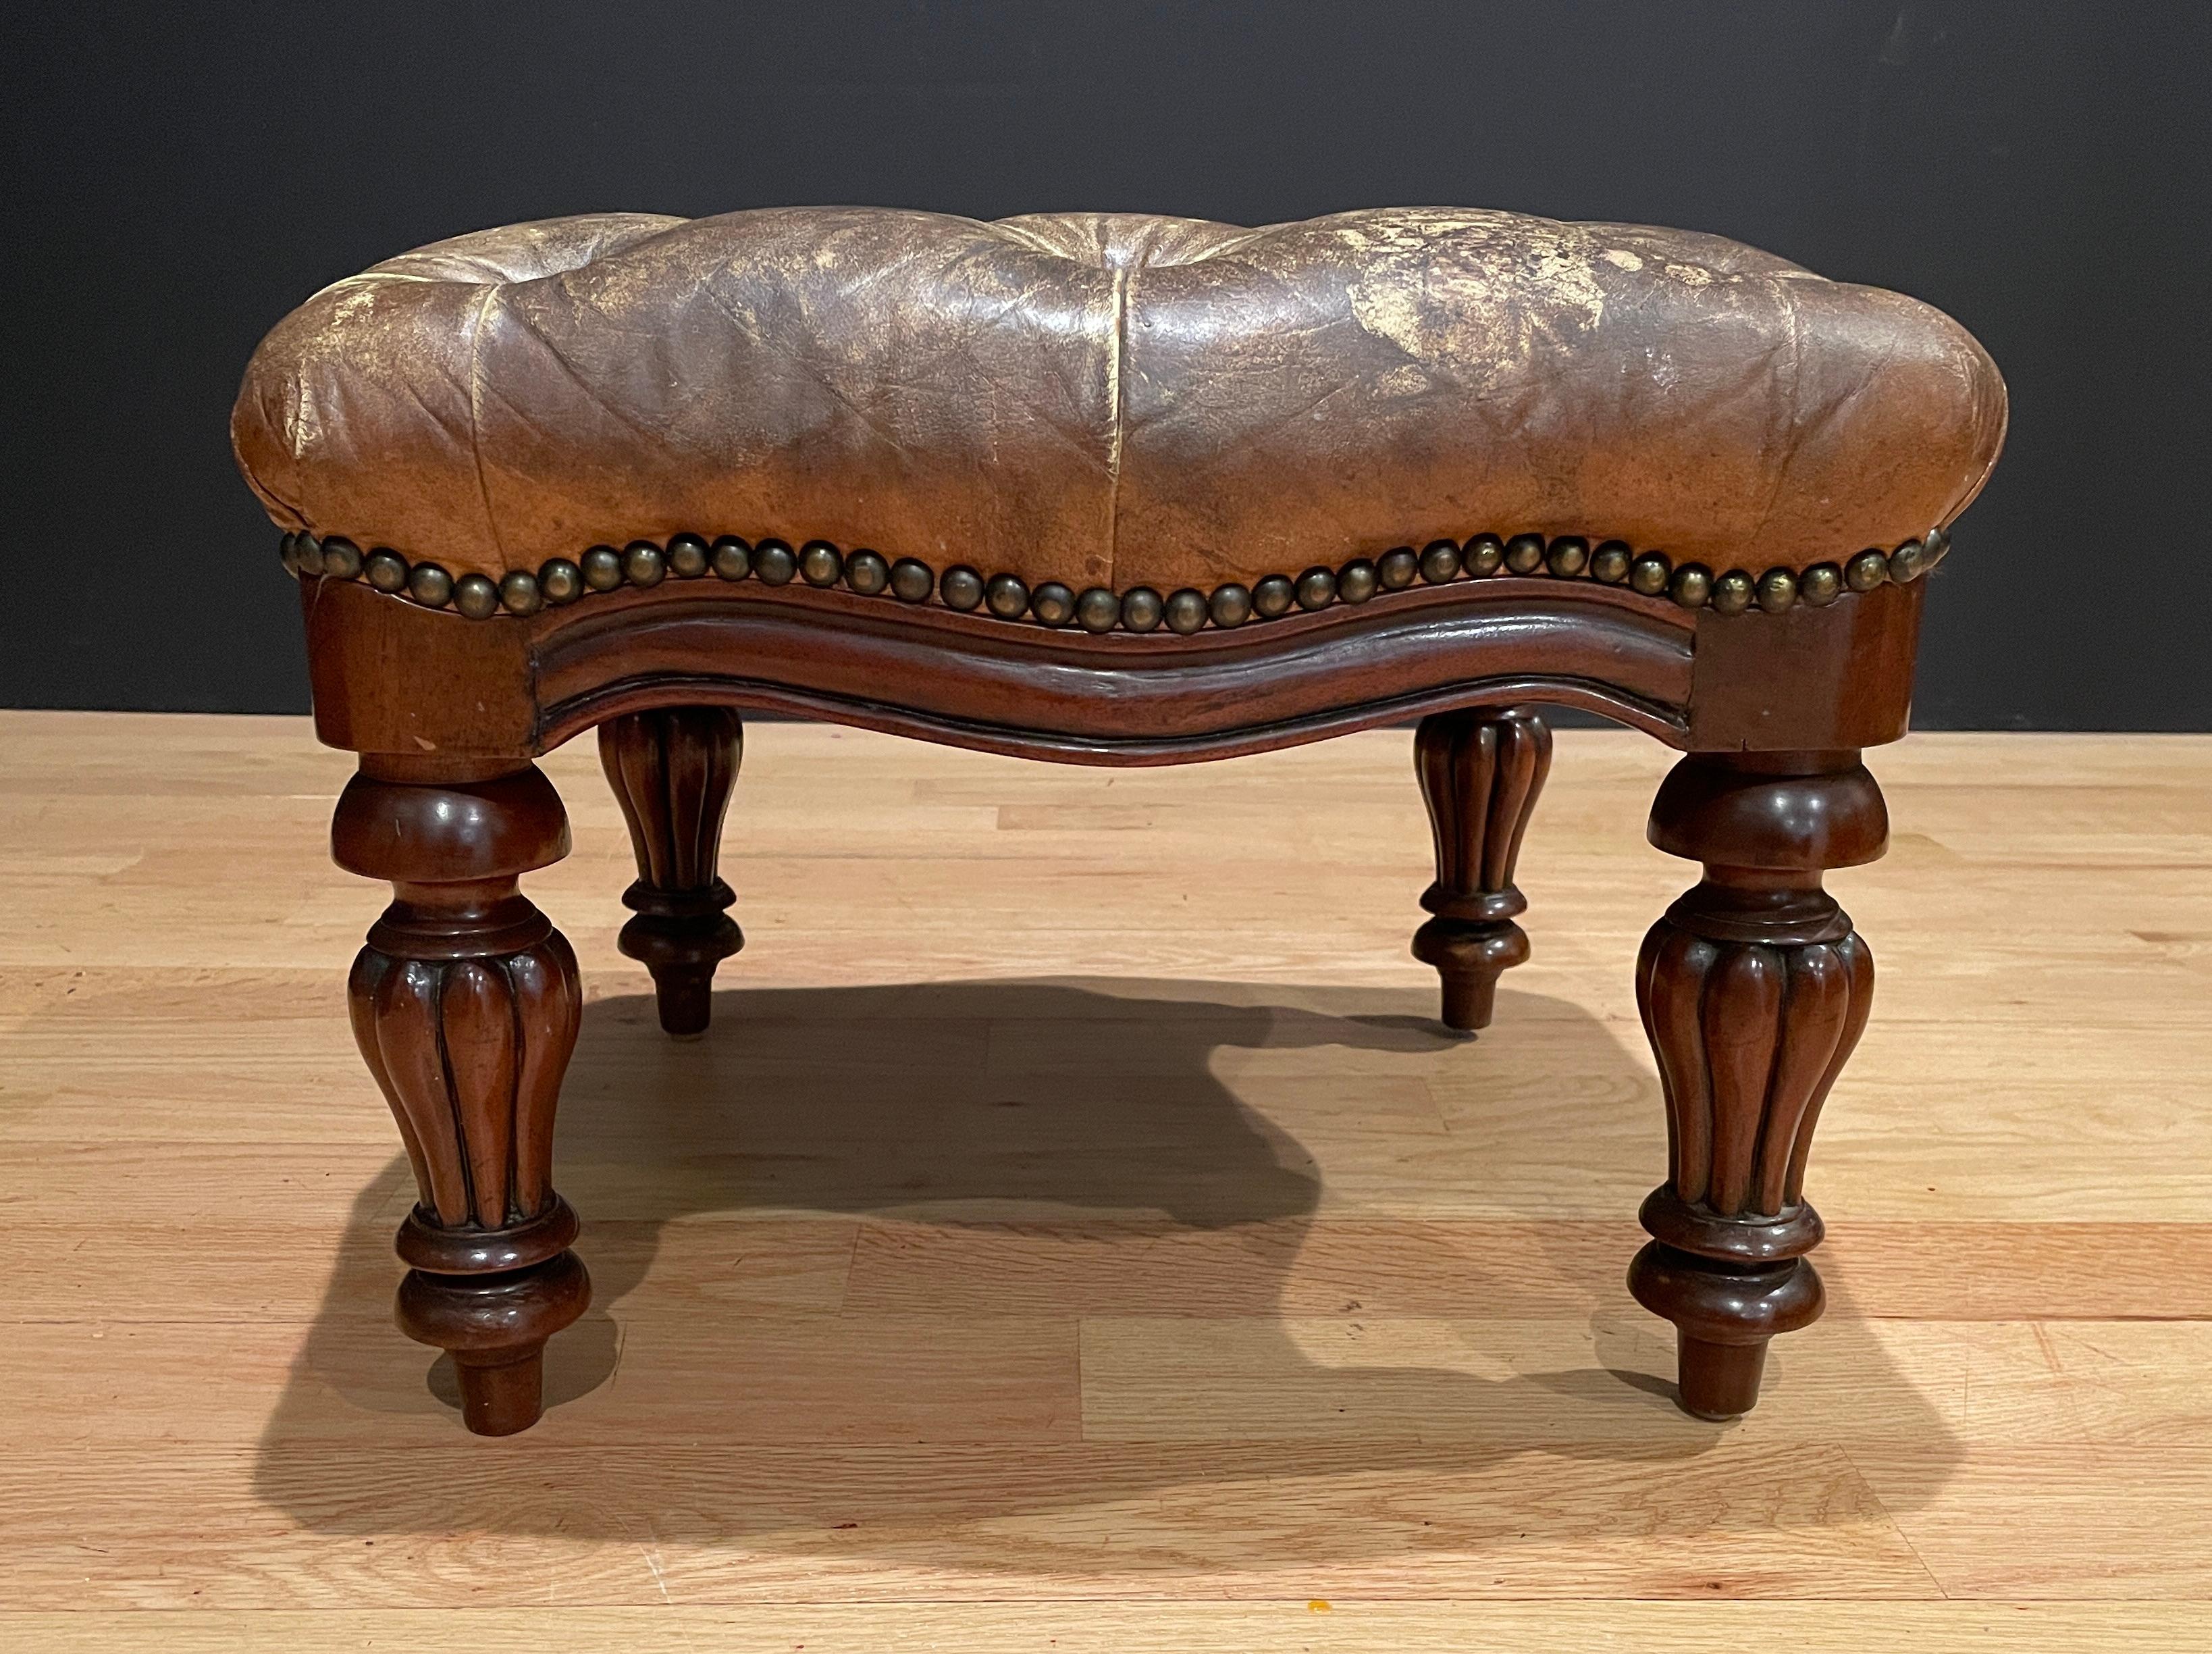 Leather Tufted Footstool In Good Condition For Sale In Norwood, NJ